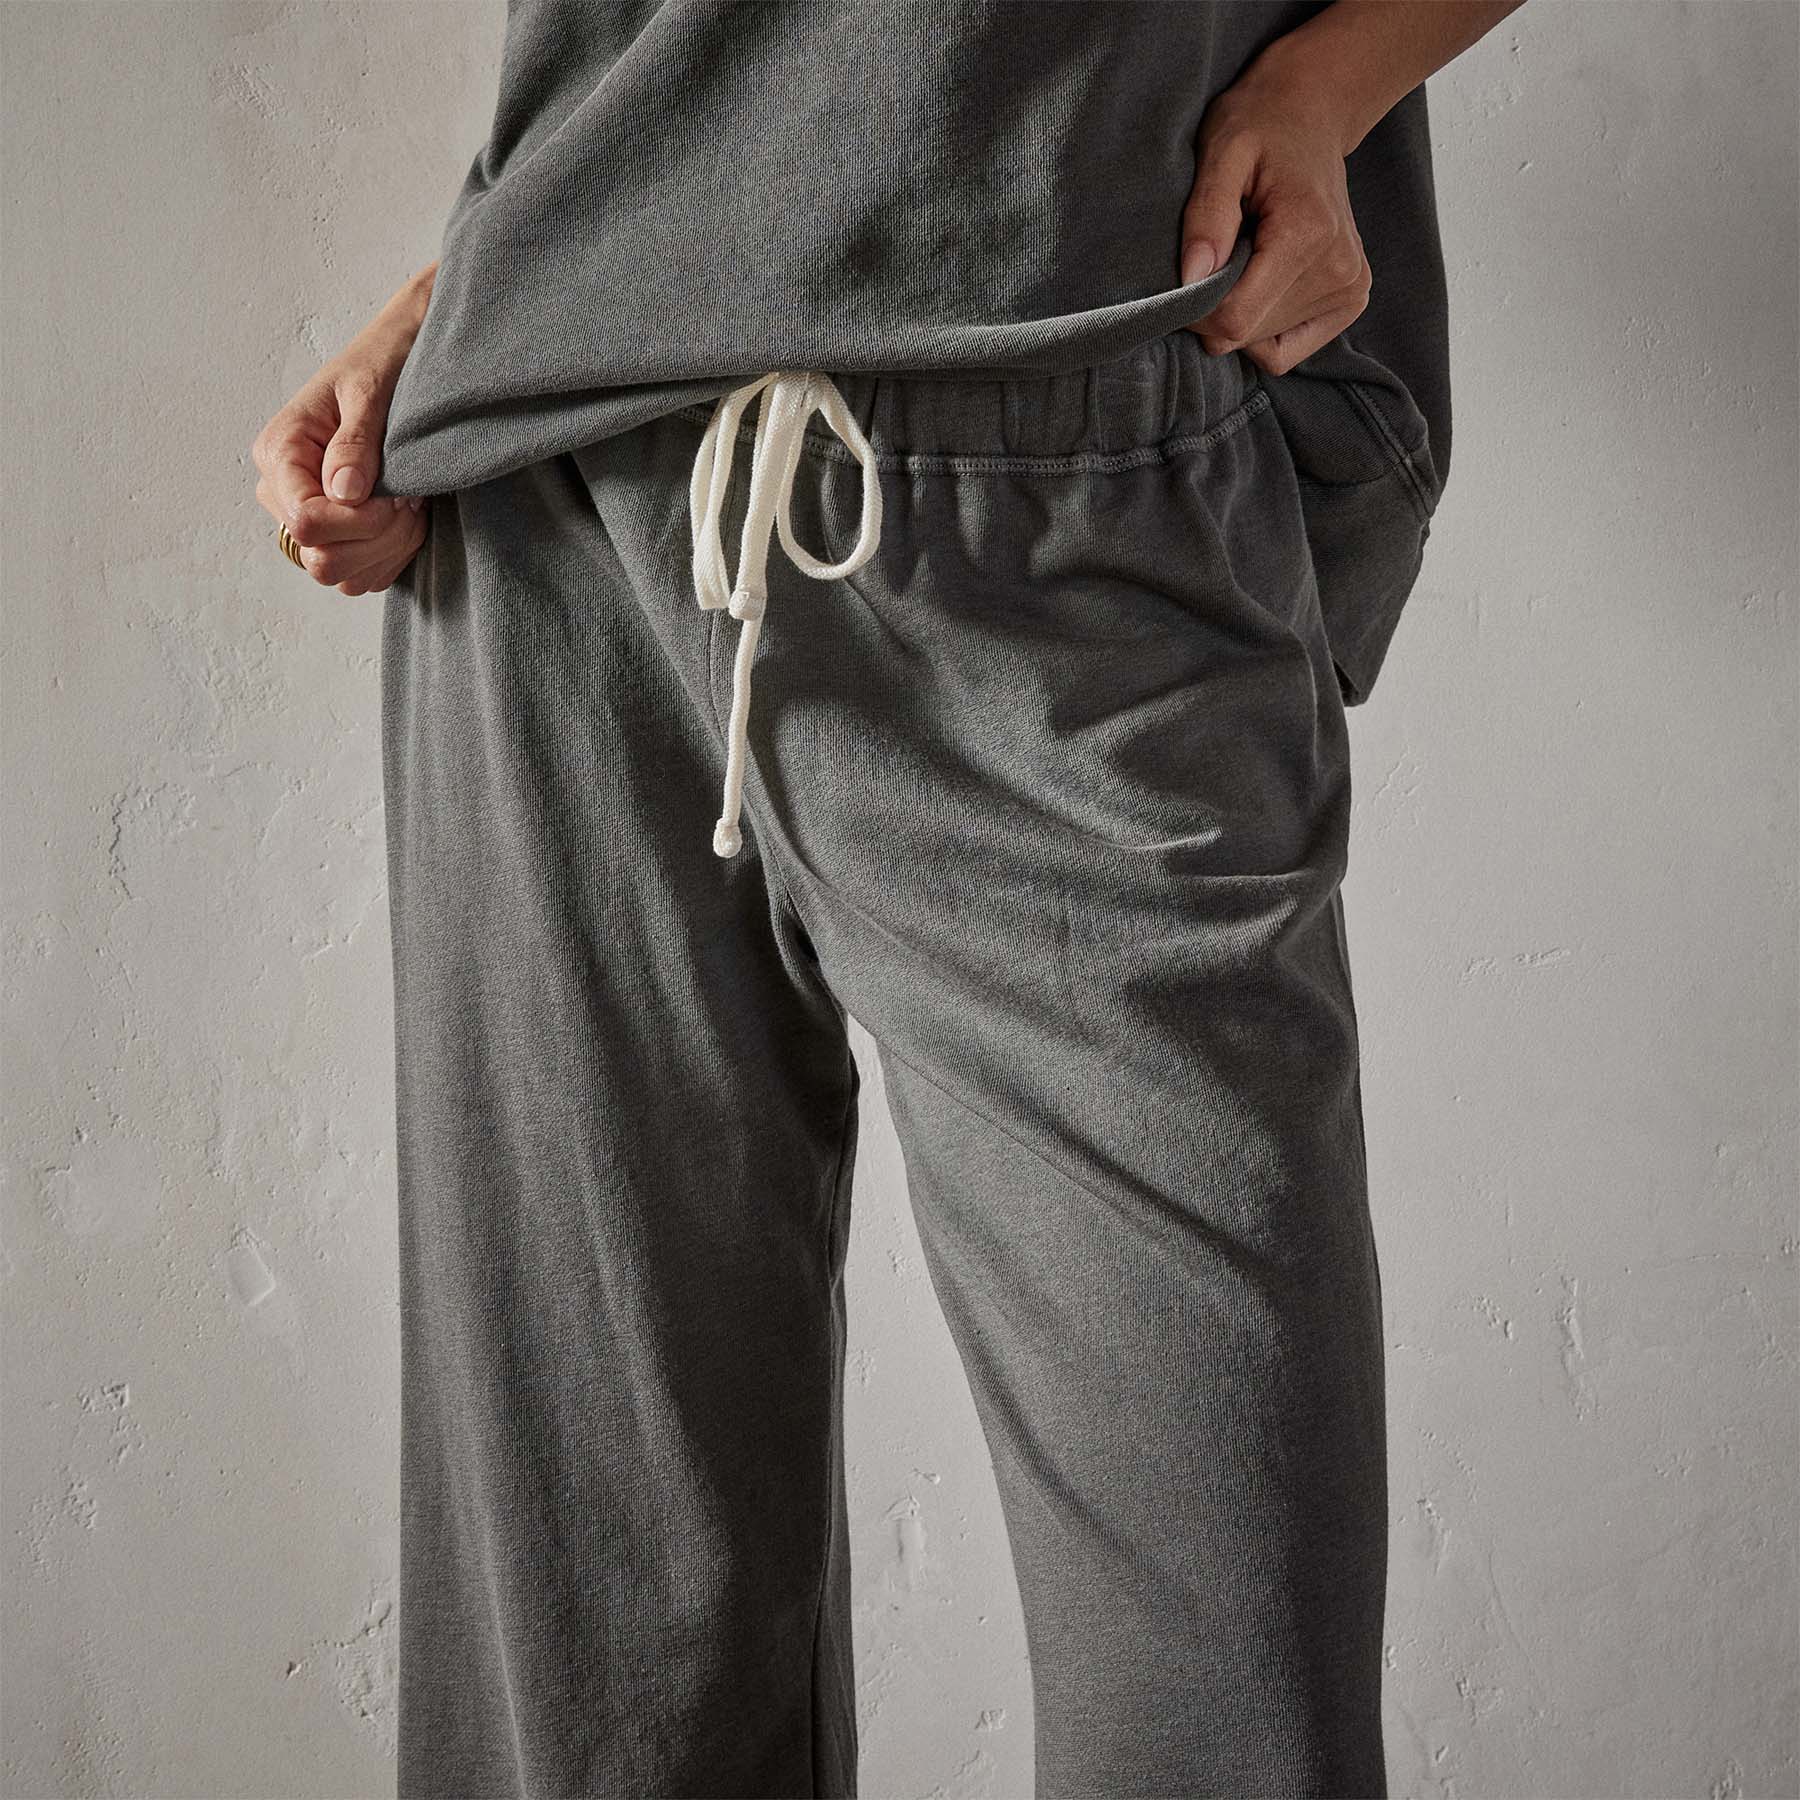 Vintage French Terry Sweatpant - Silver Grey Pigment